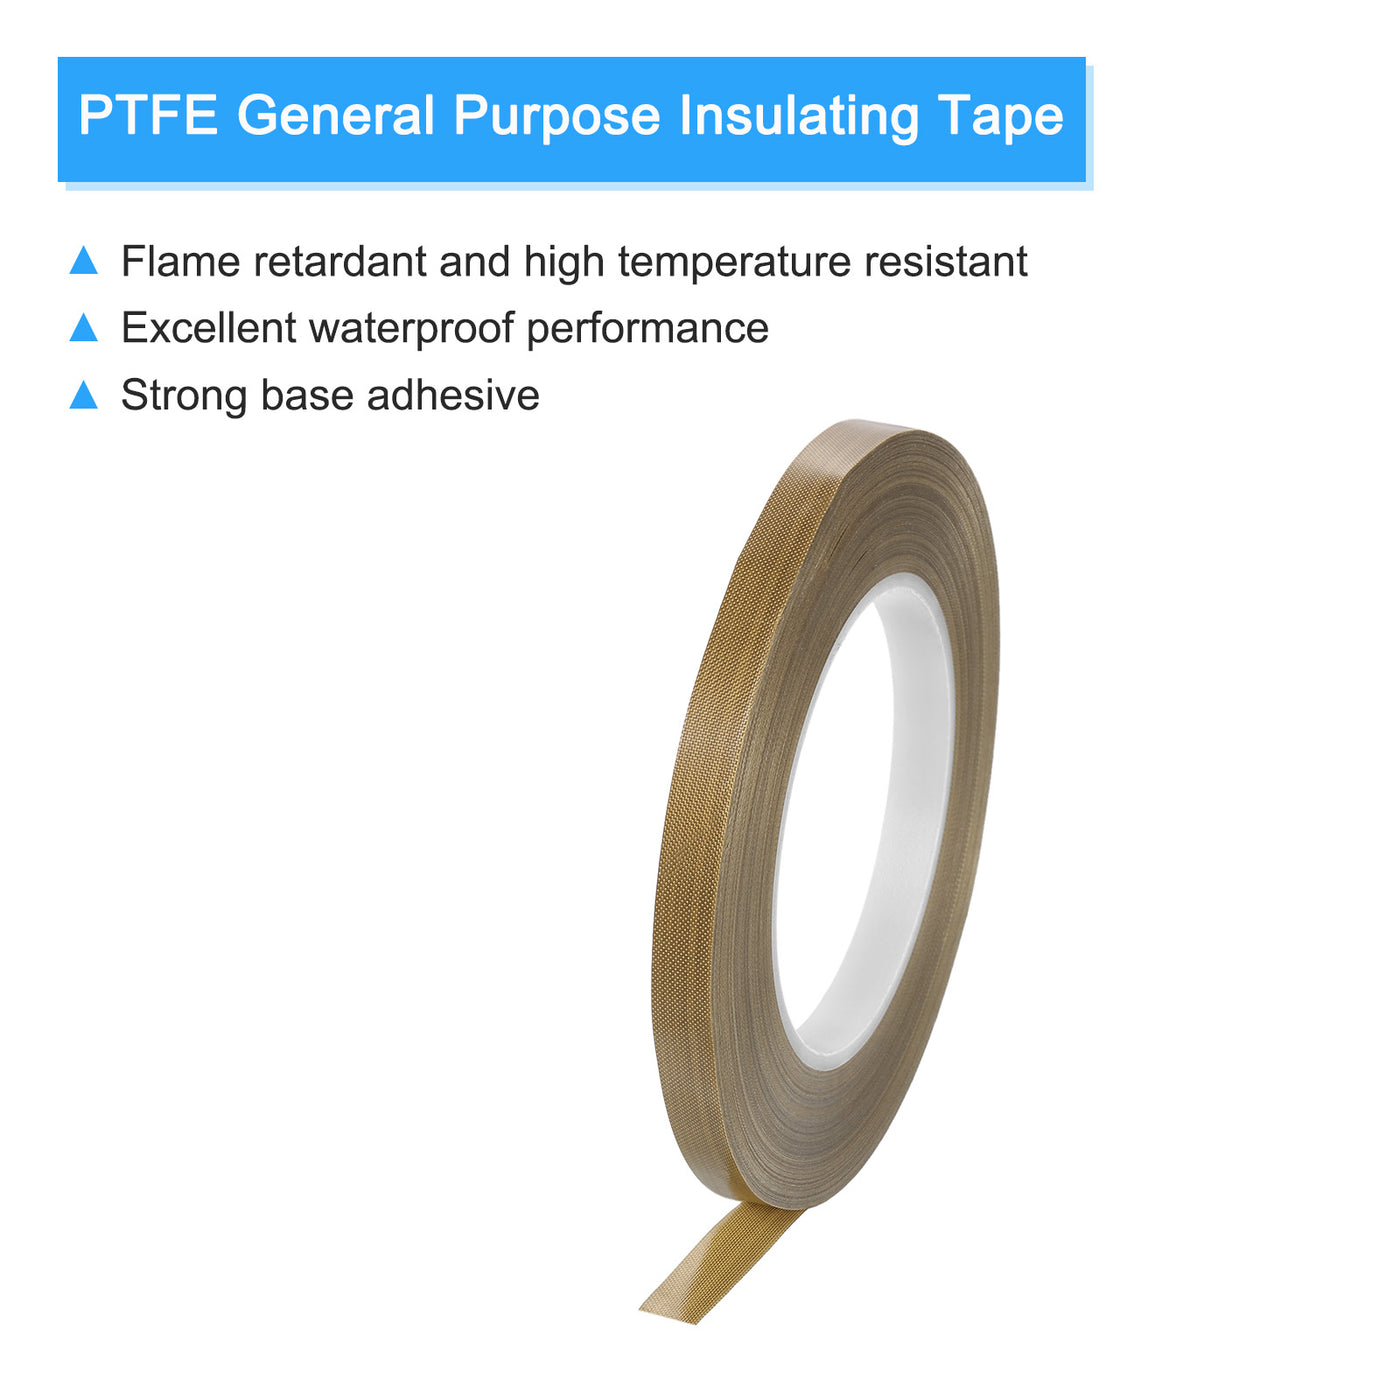 Harfington High Temperature Tape 10mm PTFE Coated Fabric Tape Heat Resistant Tape for Vacuum Sealers Adhesive Tape 50m/164ft Brown 0.13mm Thickness